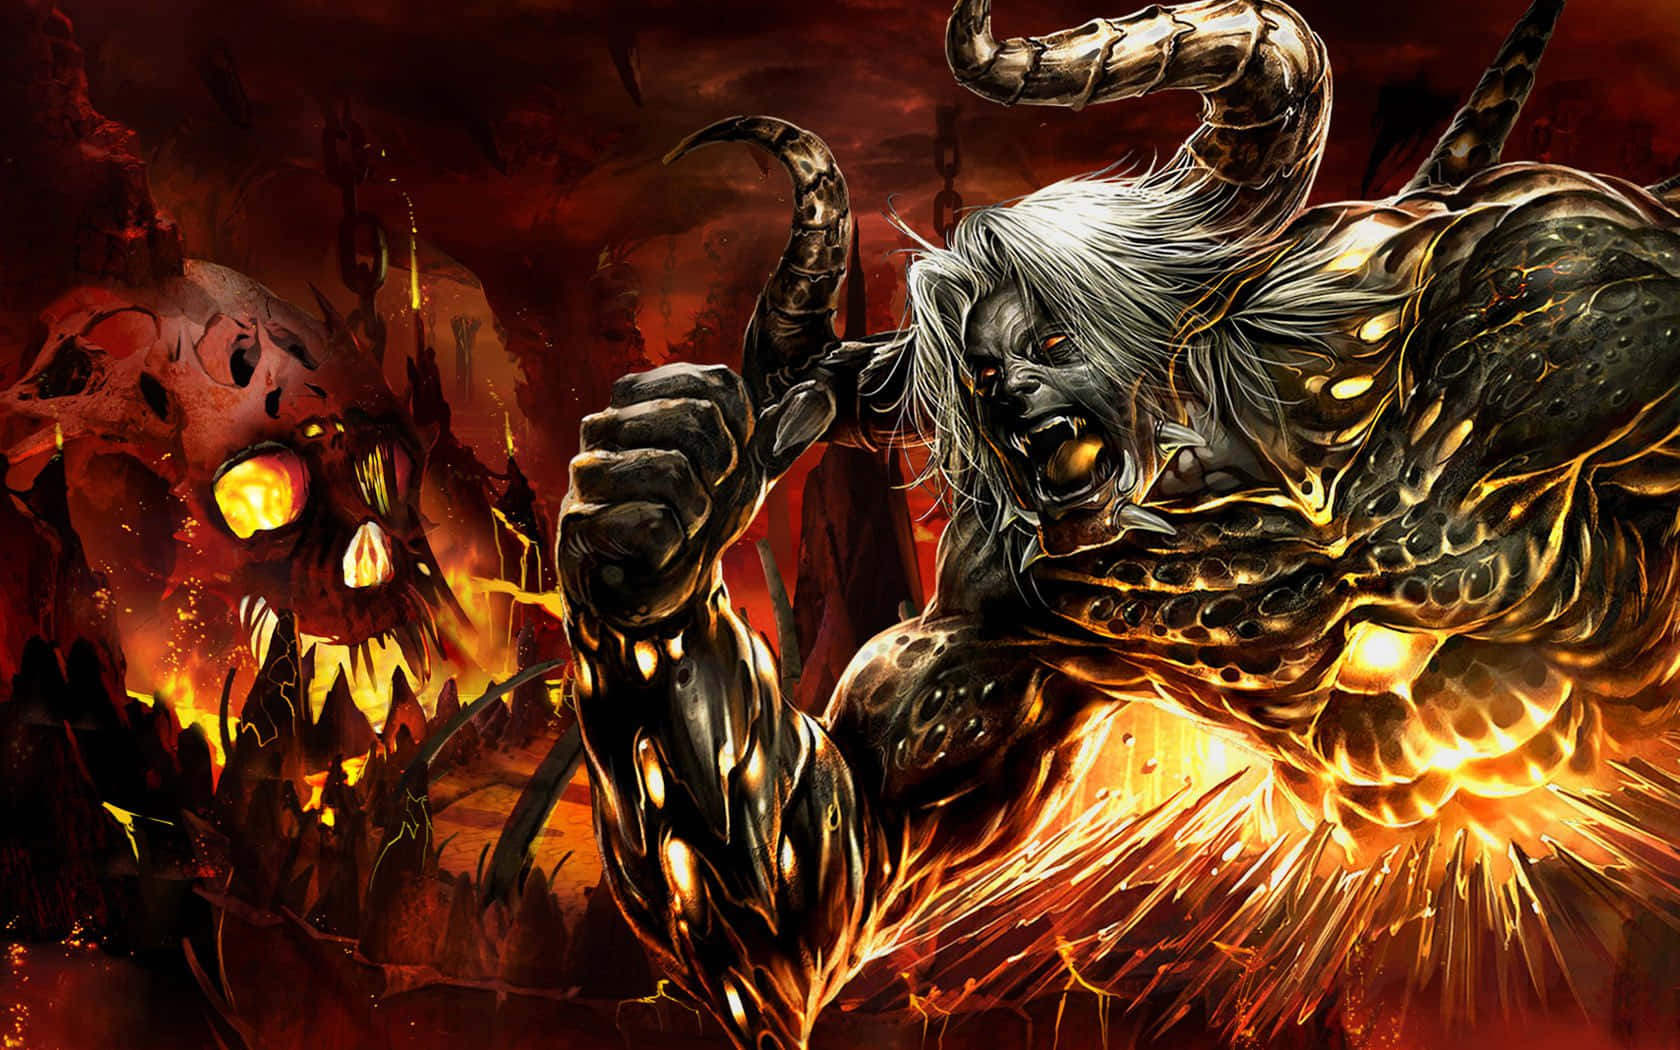 Cool Demon Emerging from Flames Wallpaper